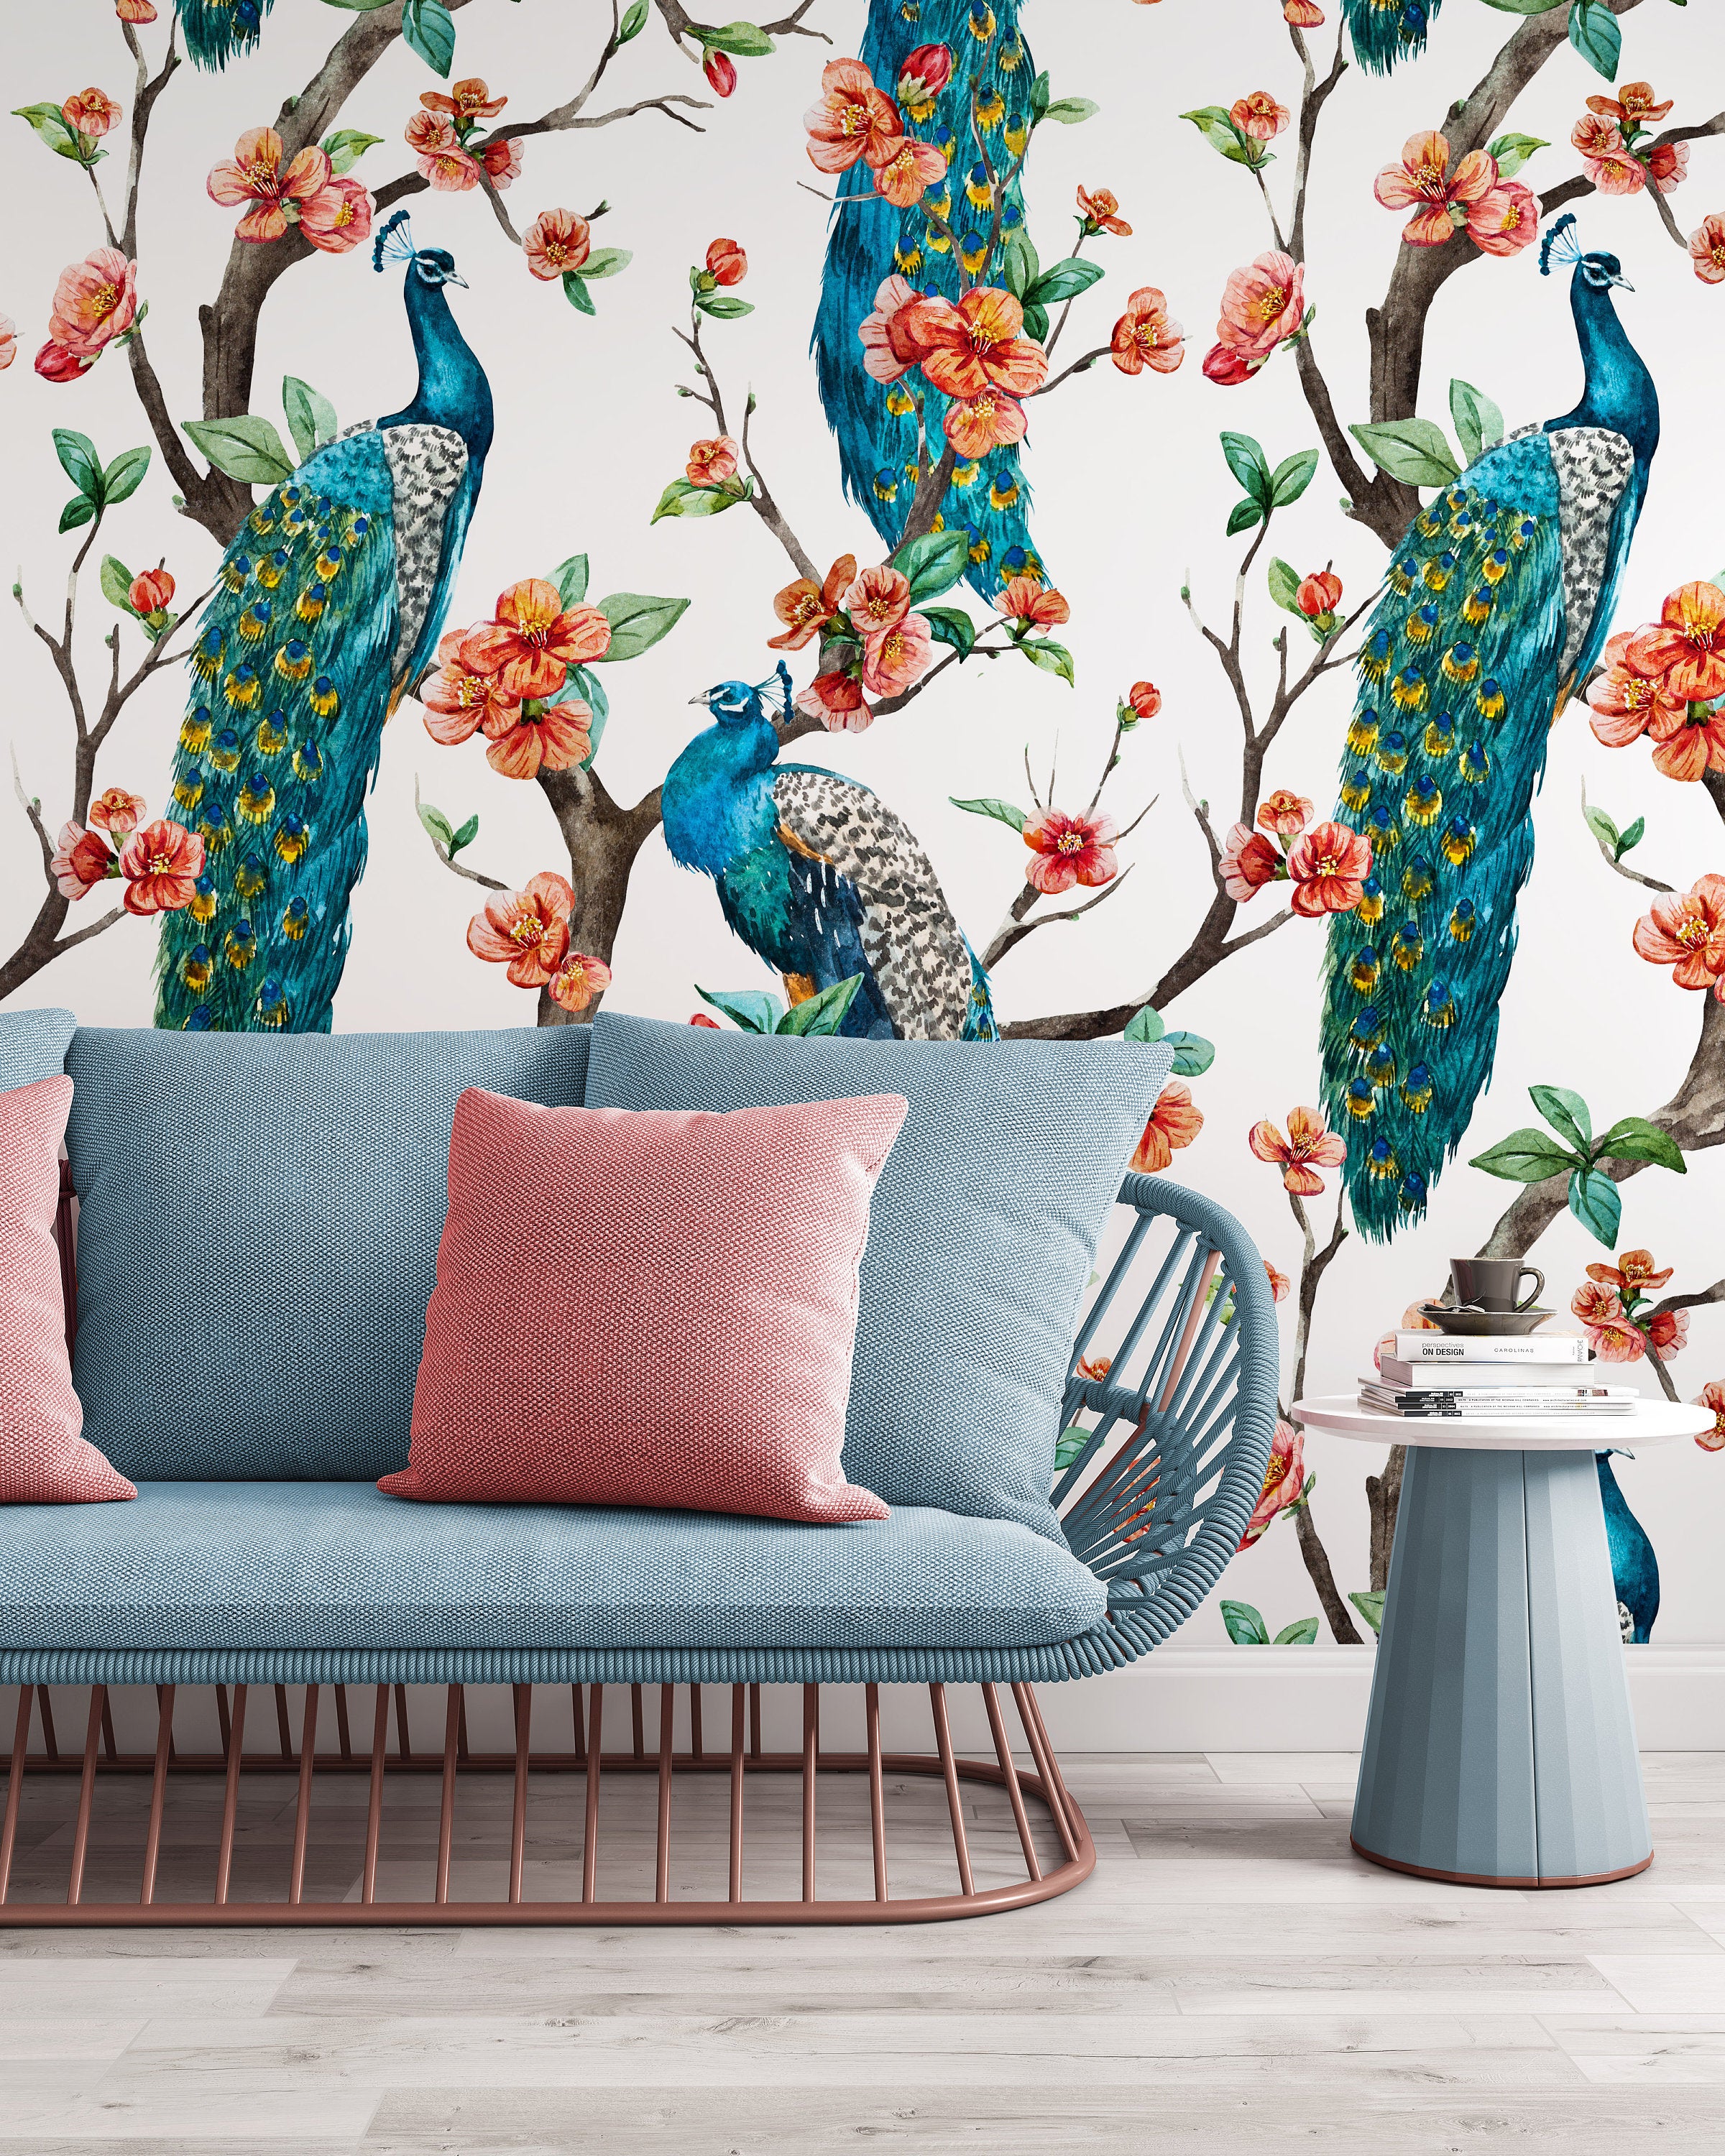 Watercolor Peacock on the Tree Cherry Wallpaper Self Adhesive Peel & Stick Wall Sticker Wall Decoration Scandinavian Design Removable